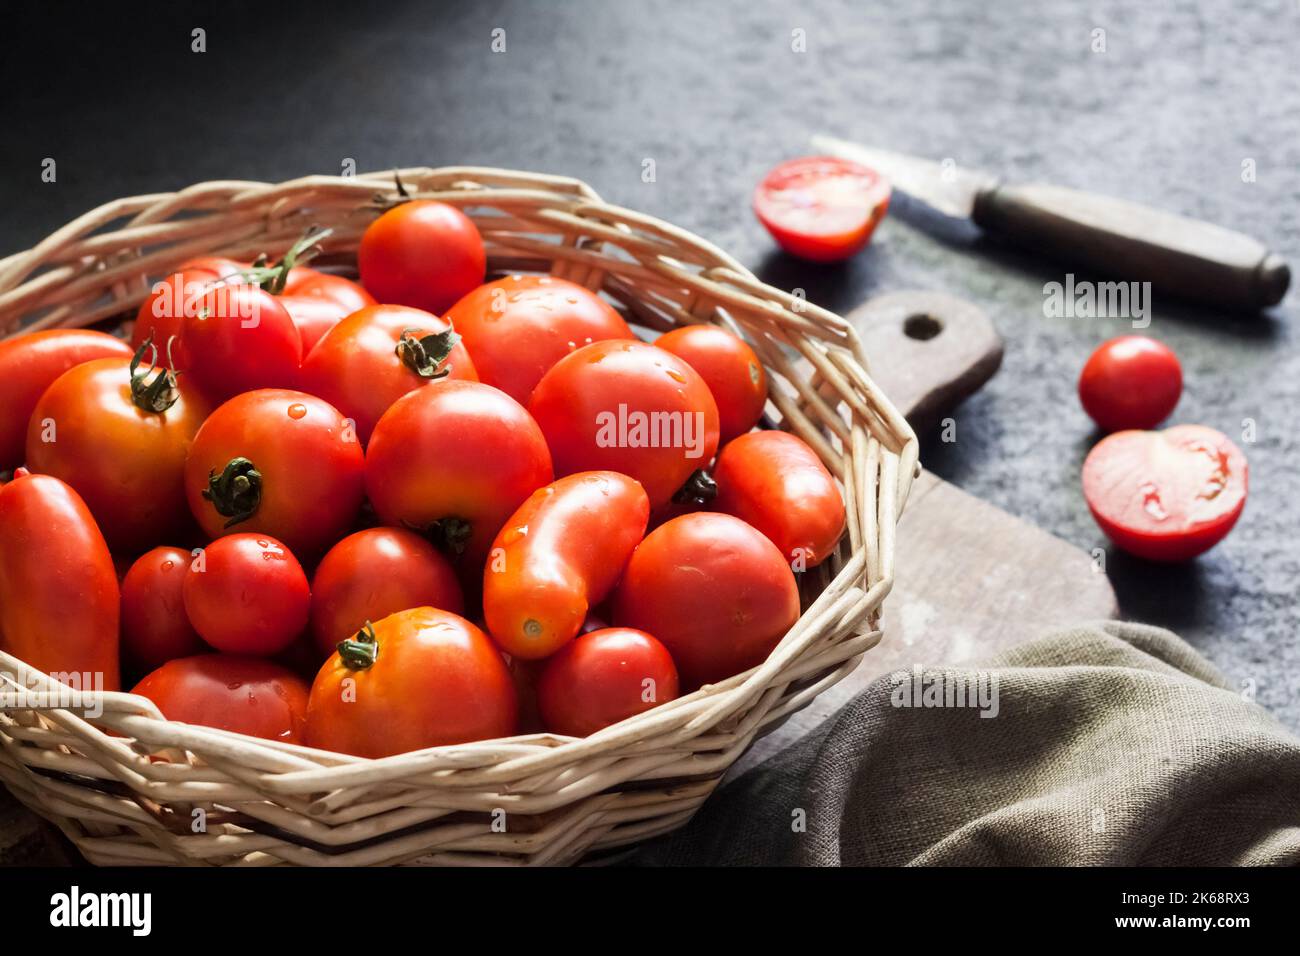 Fresh red tomatoes in whicker basket on black background. Stock Photo